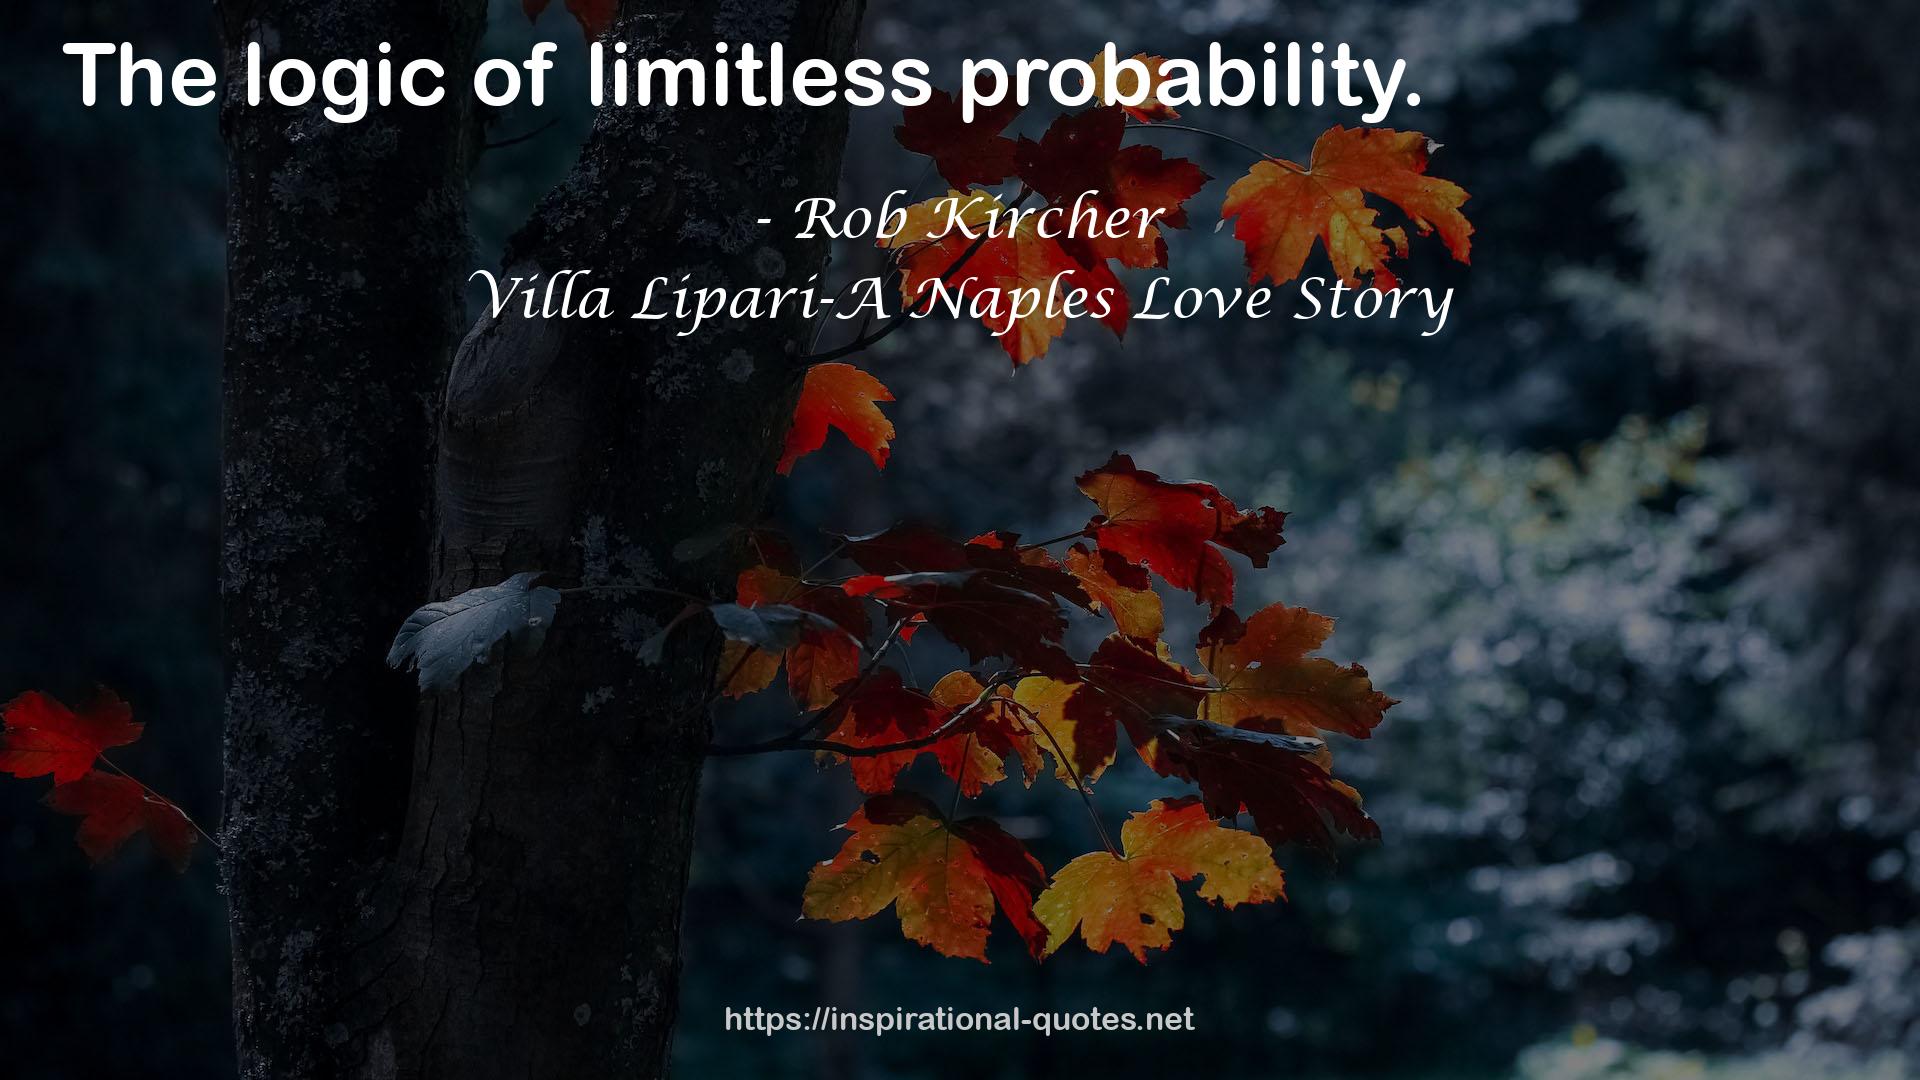 Rob Kircher QUOTES